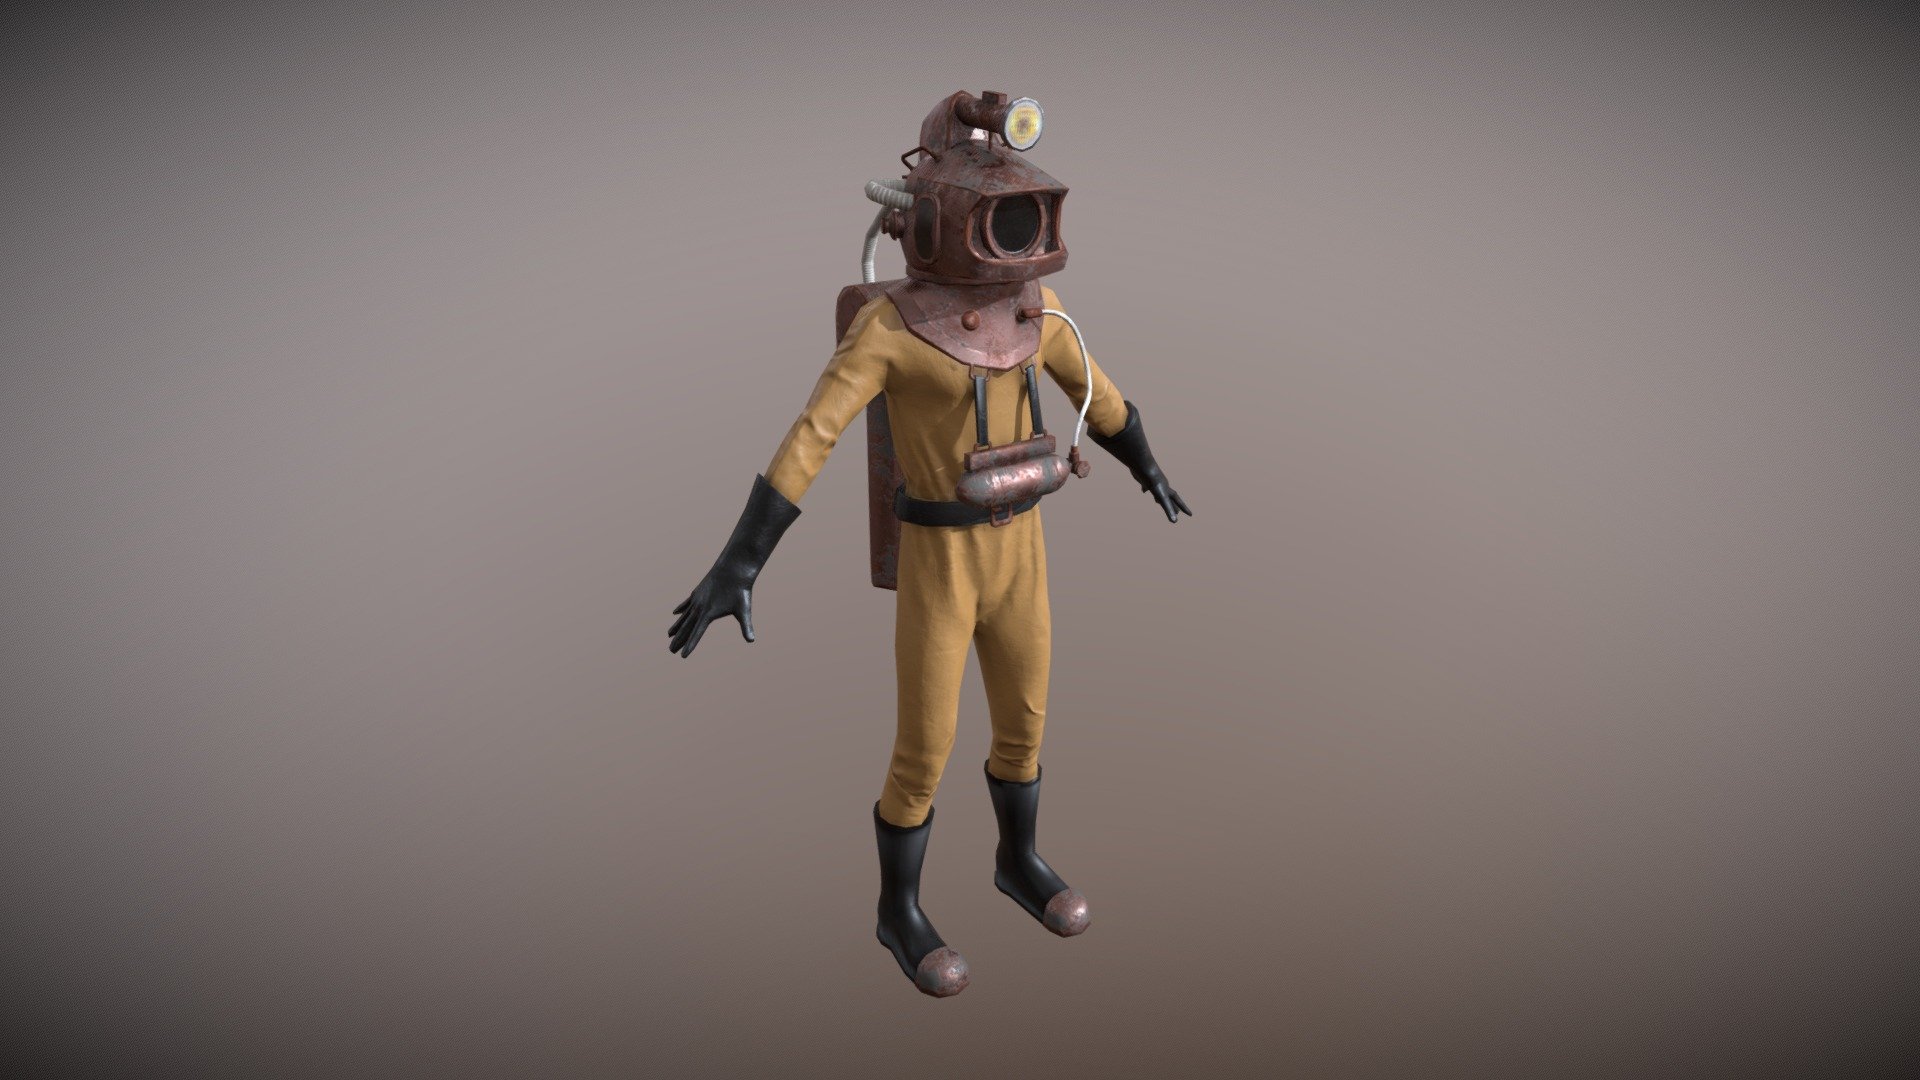 Diver from the Magic Kingdom attraction 20,000 Leagues Under the Sea 3d model